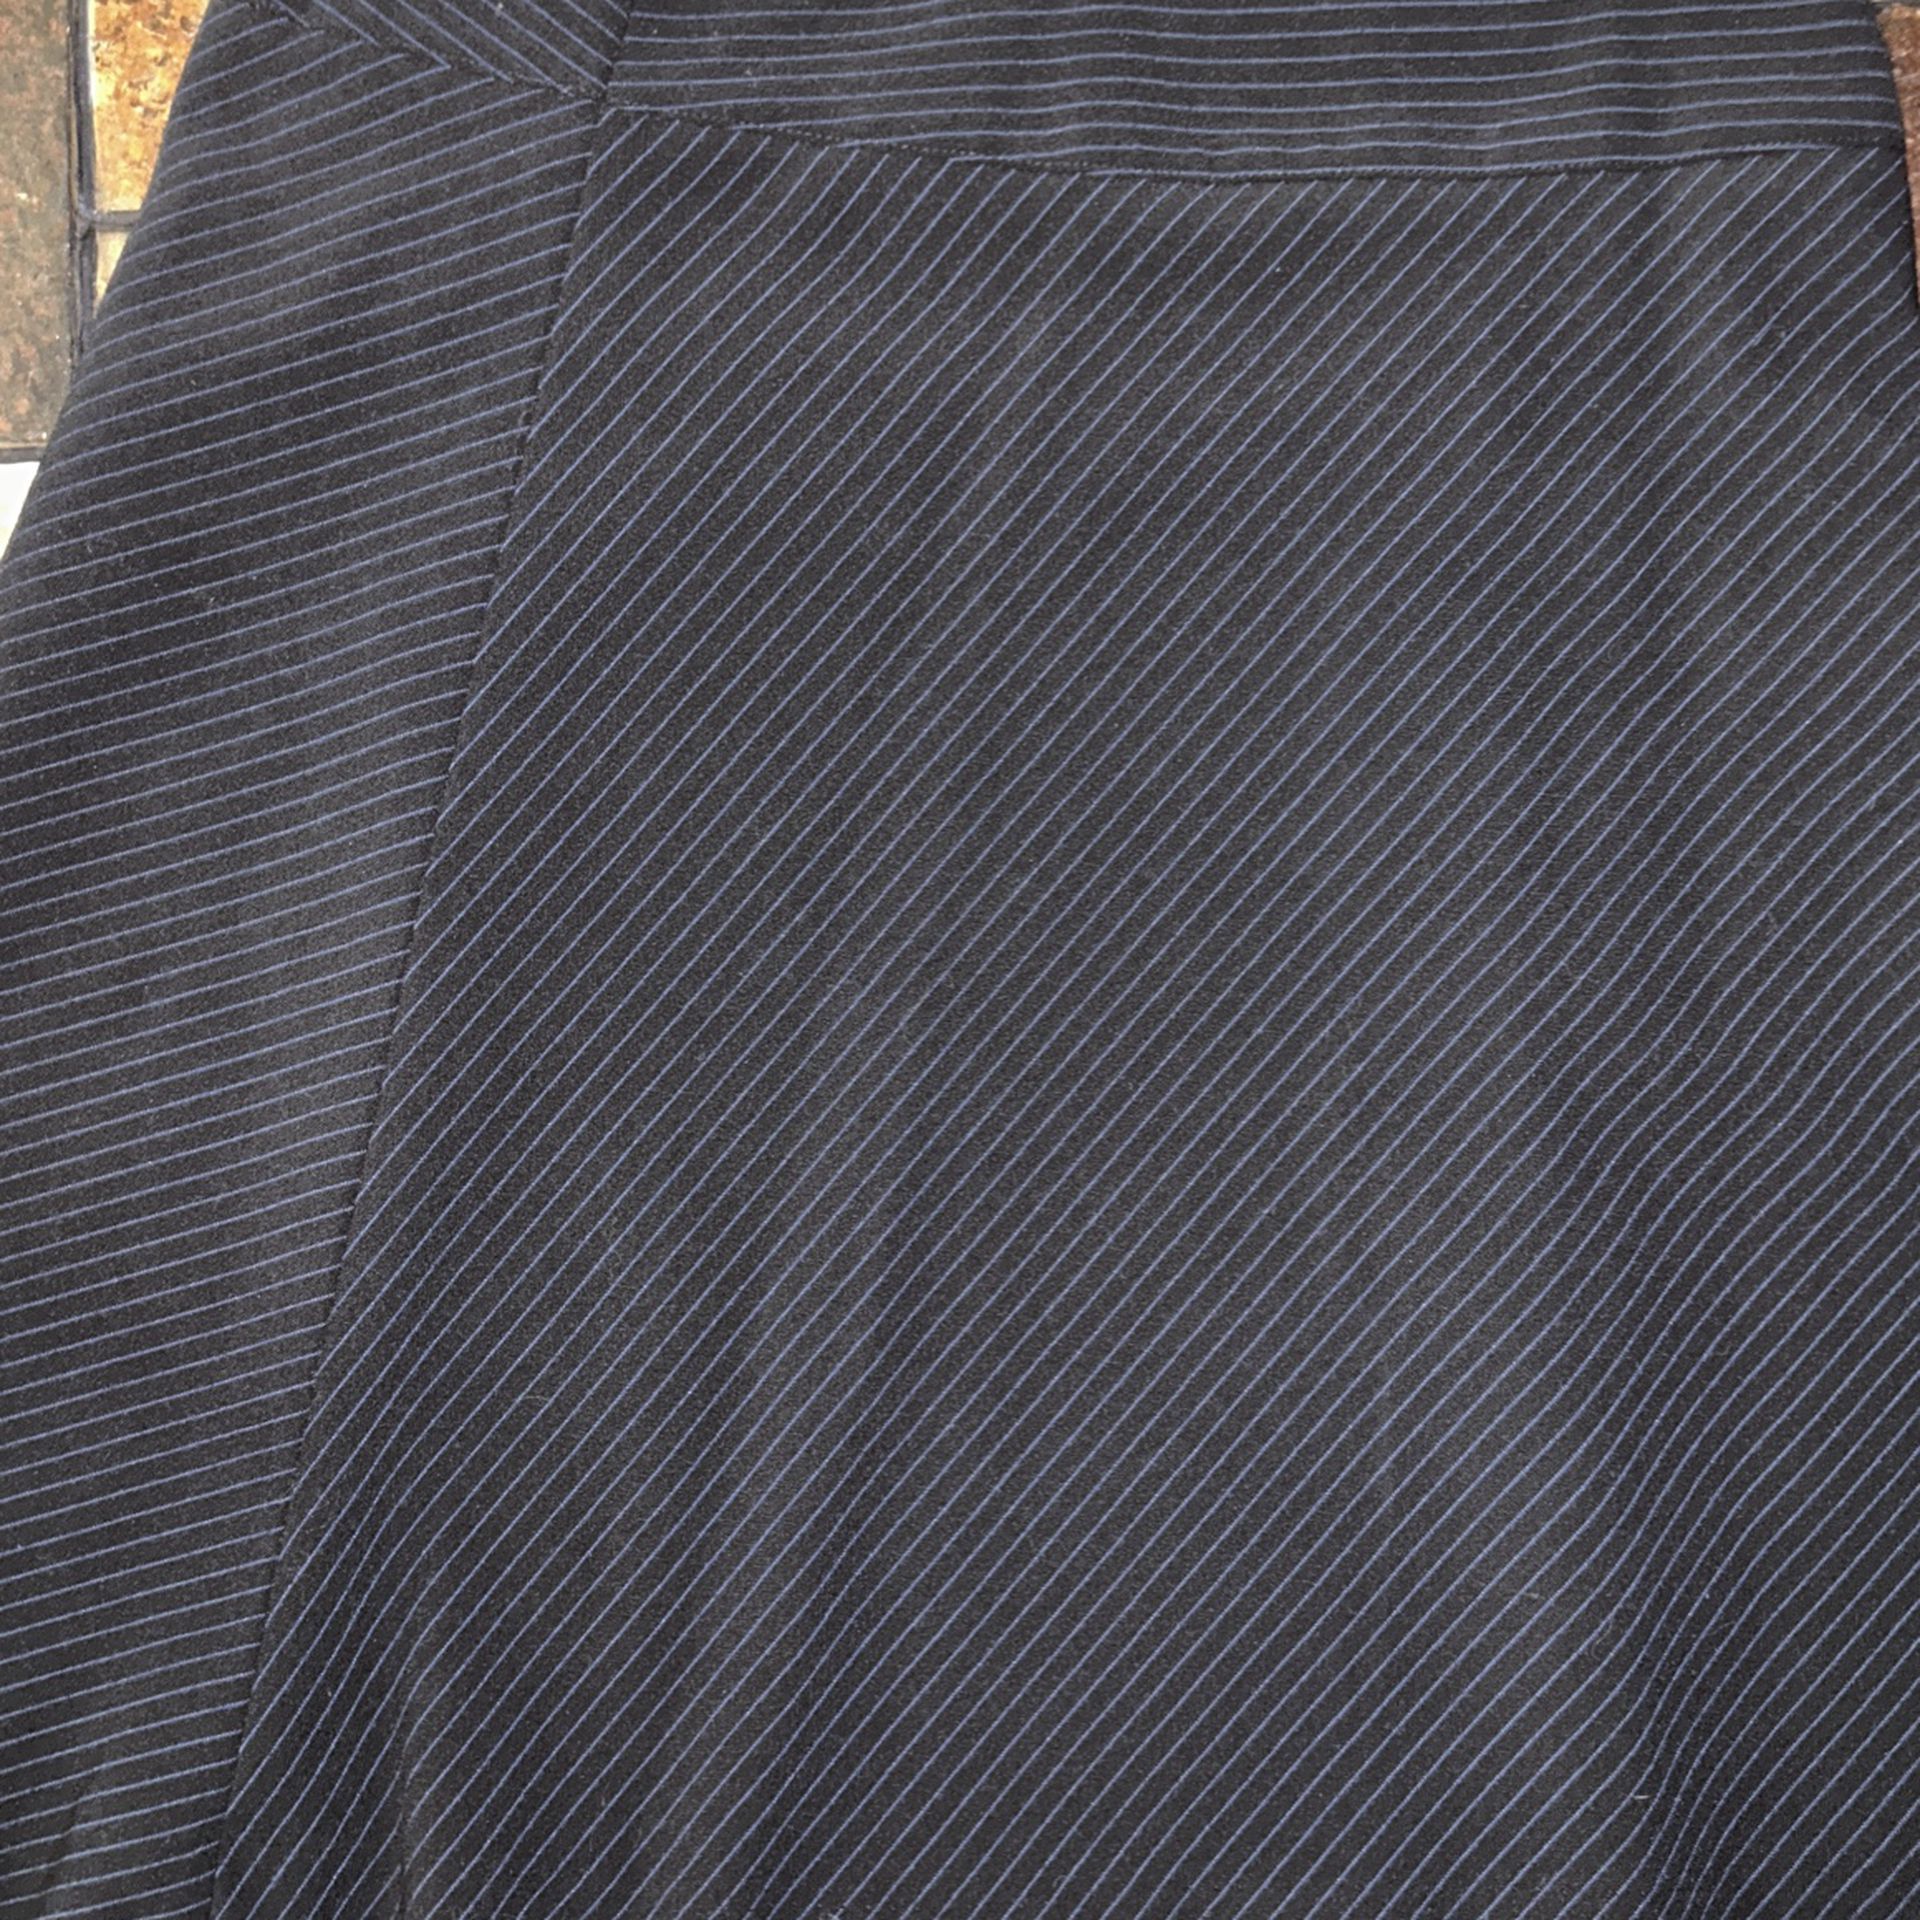 Express Design Studio Pencil Skirt Size 0 Black With Blue Lining 